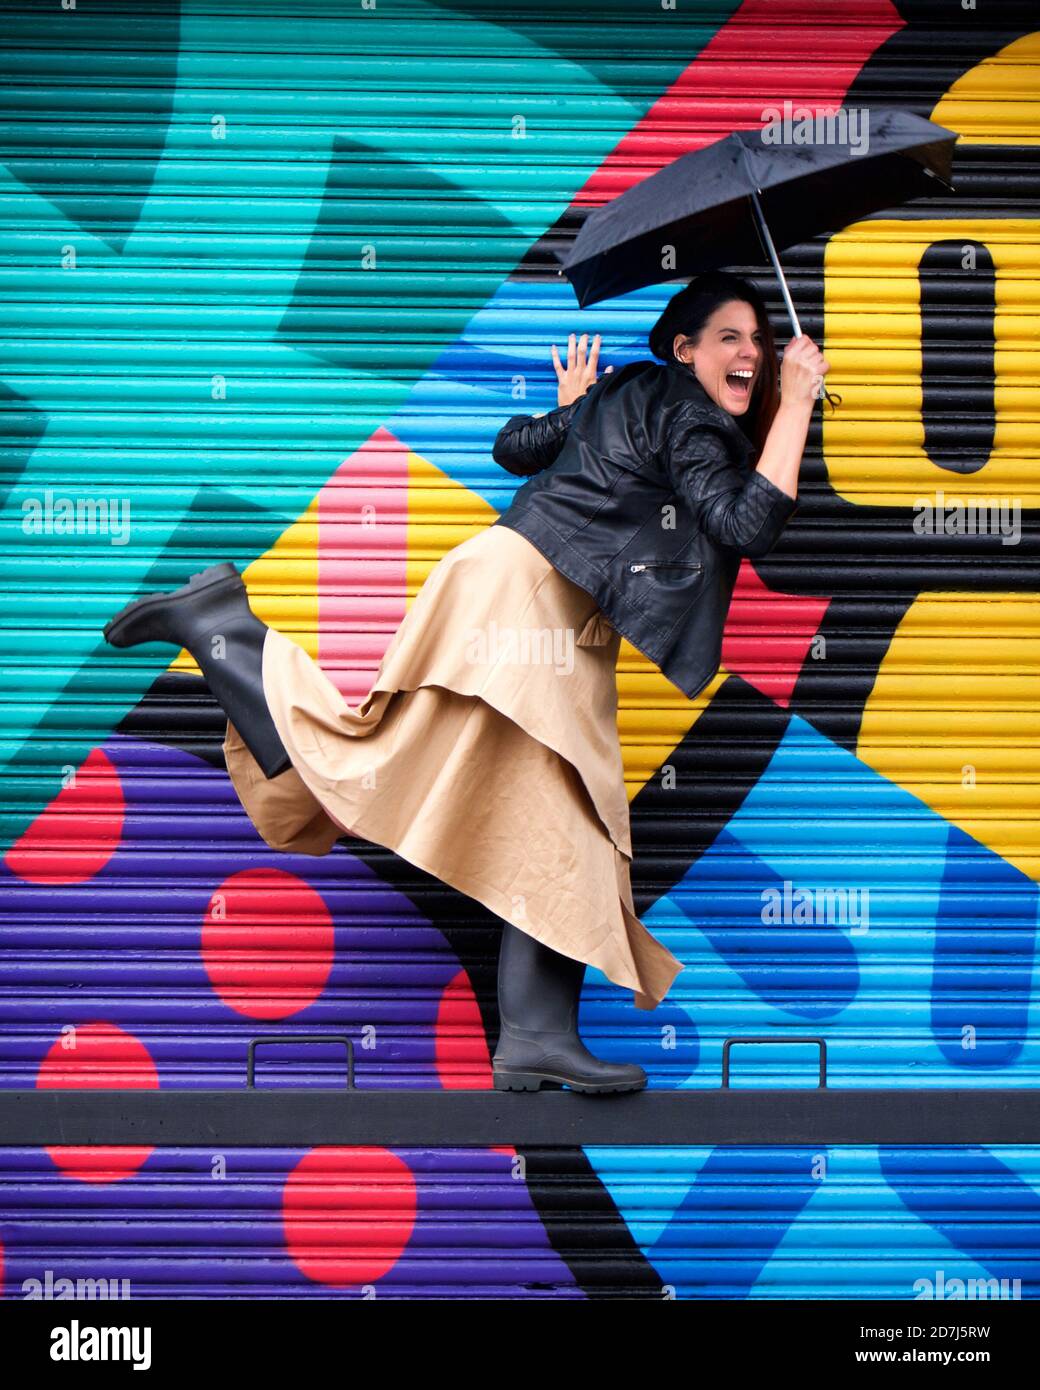 laughing woman balancing on bar in front of colourful mural Stock Photo